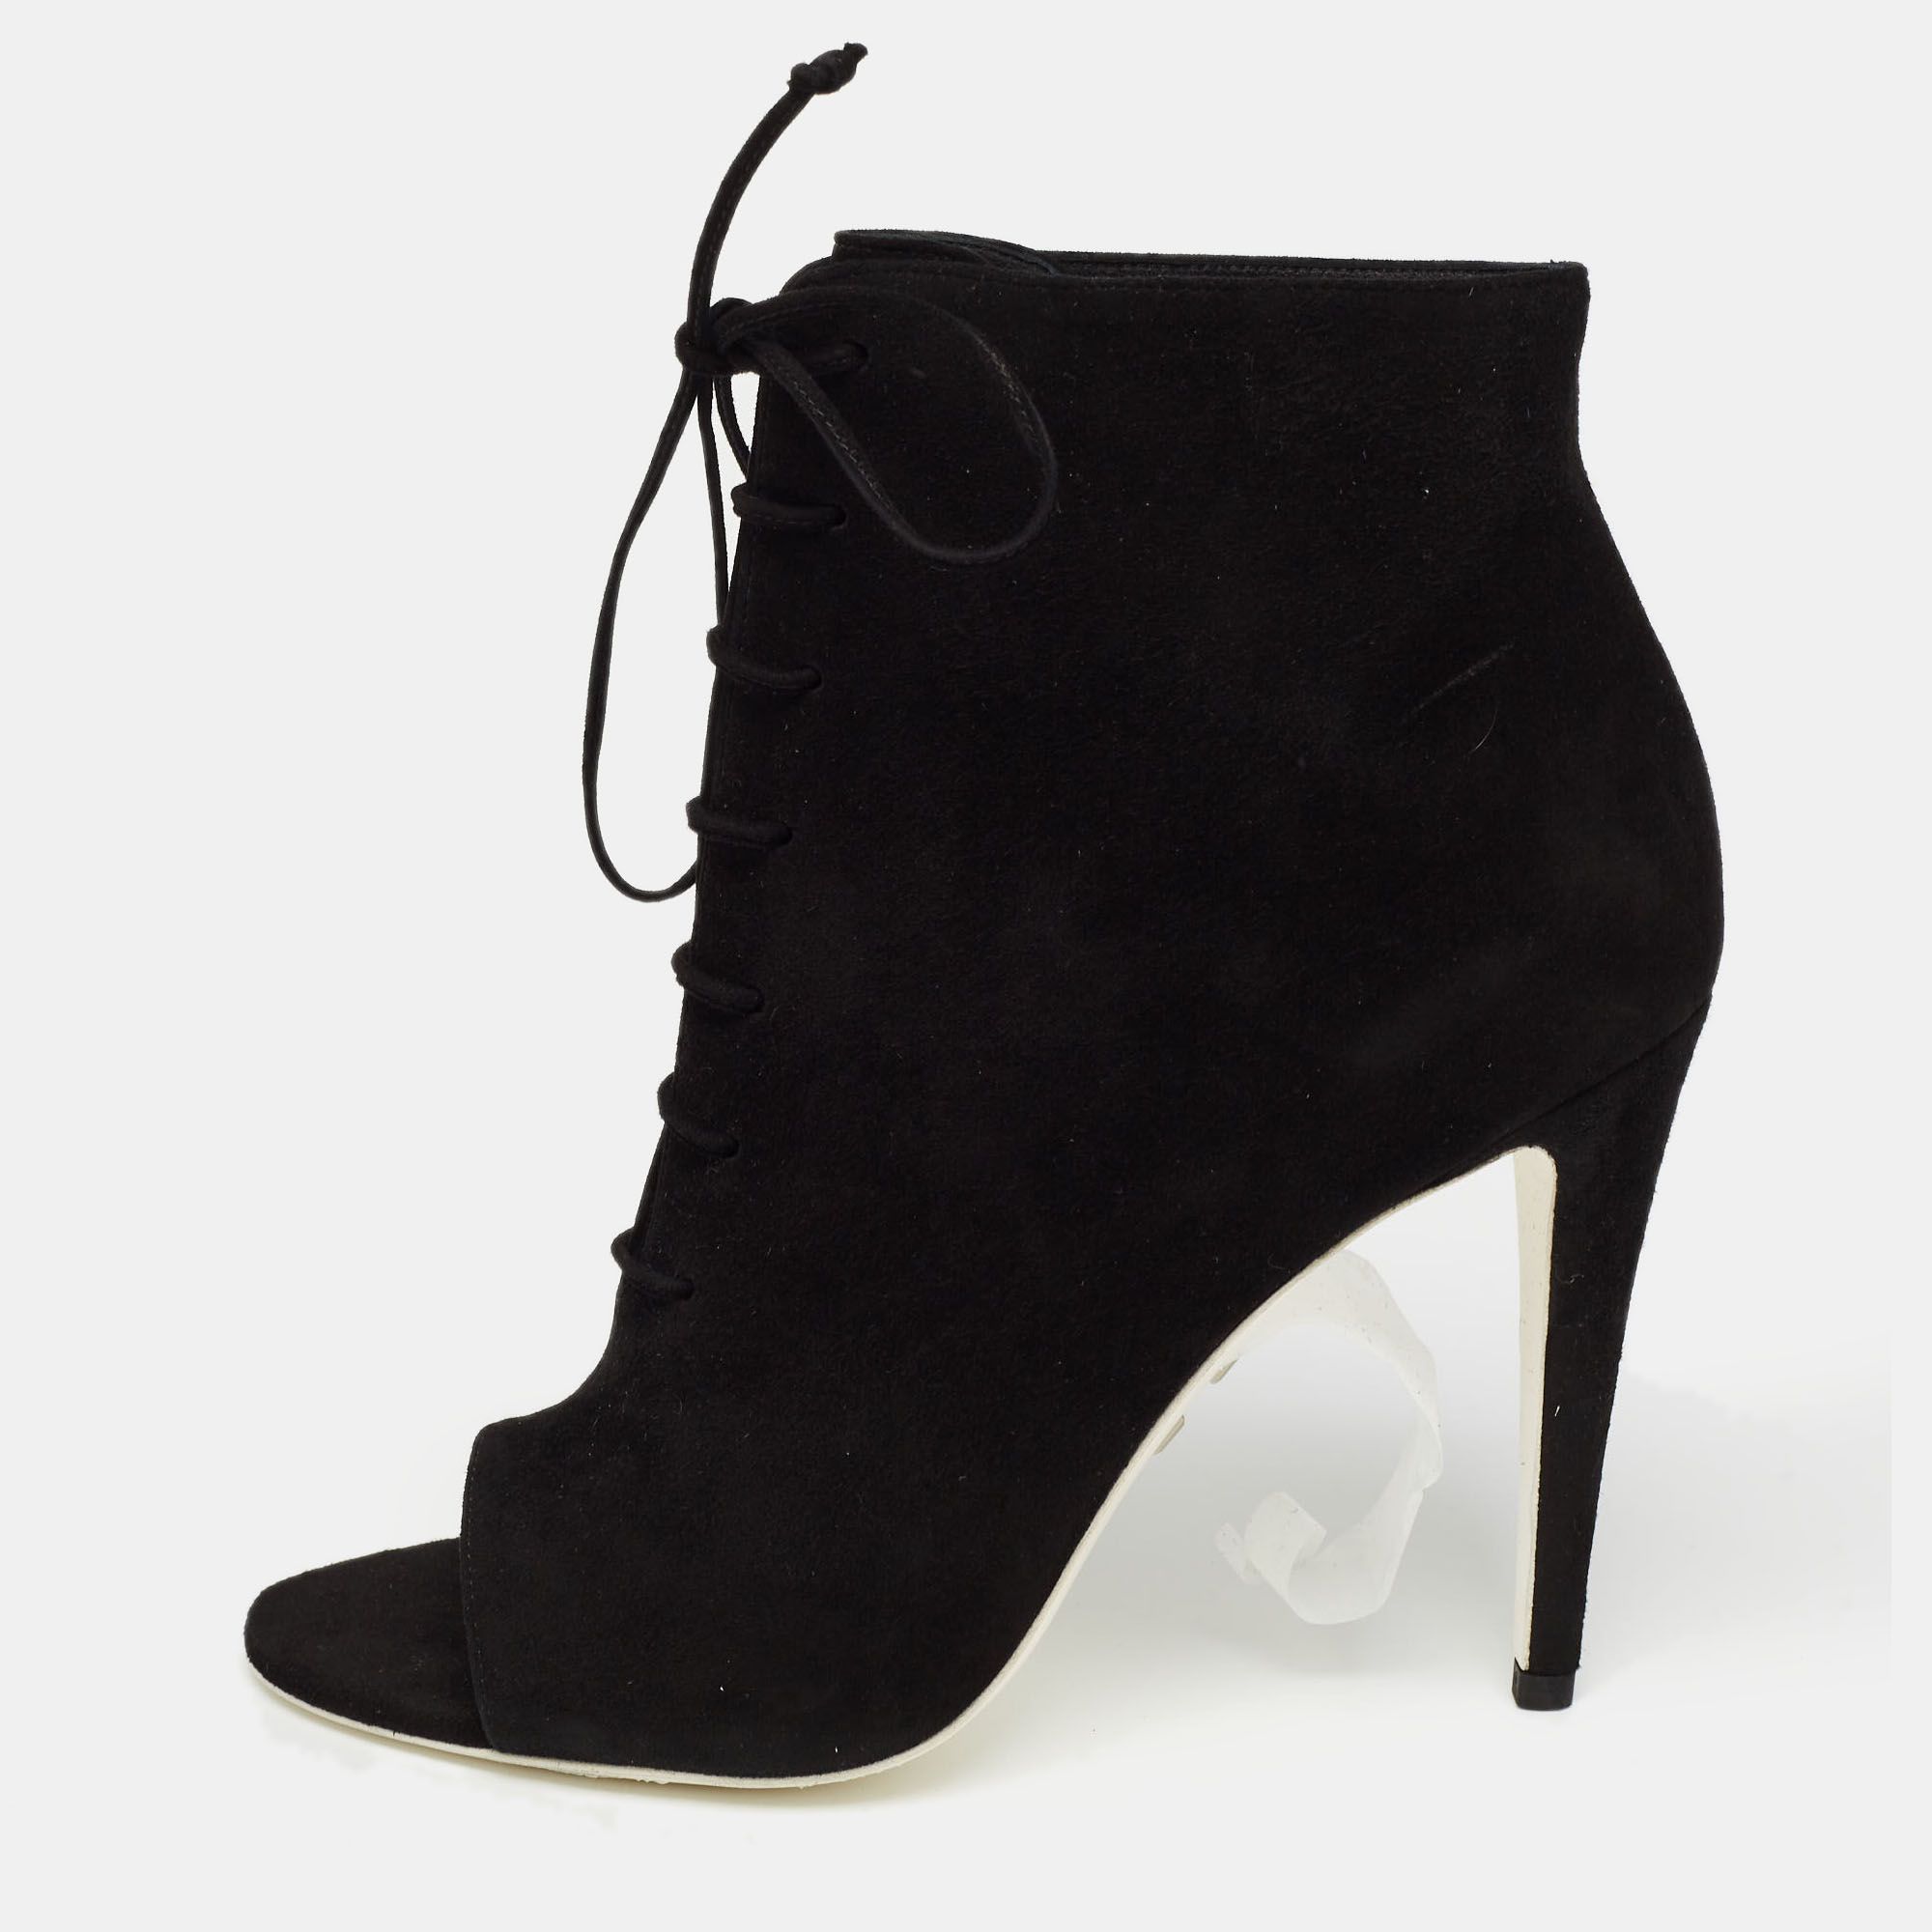 Off-white black suede open toe lace up ankle booties size 39